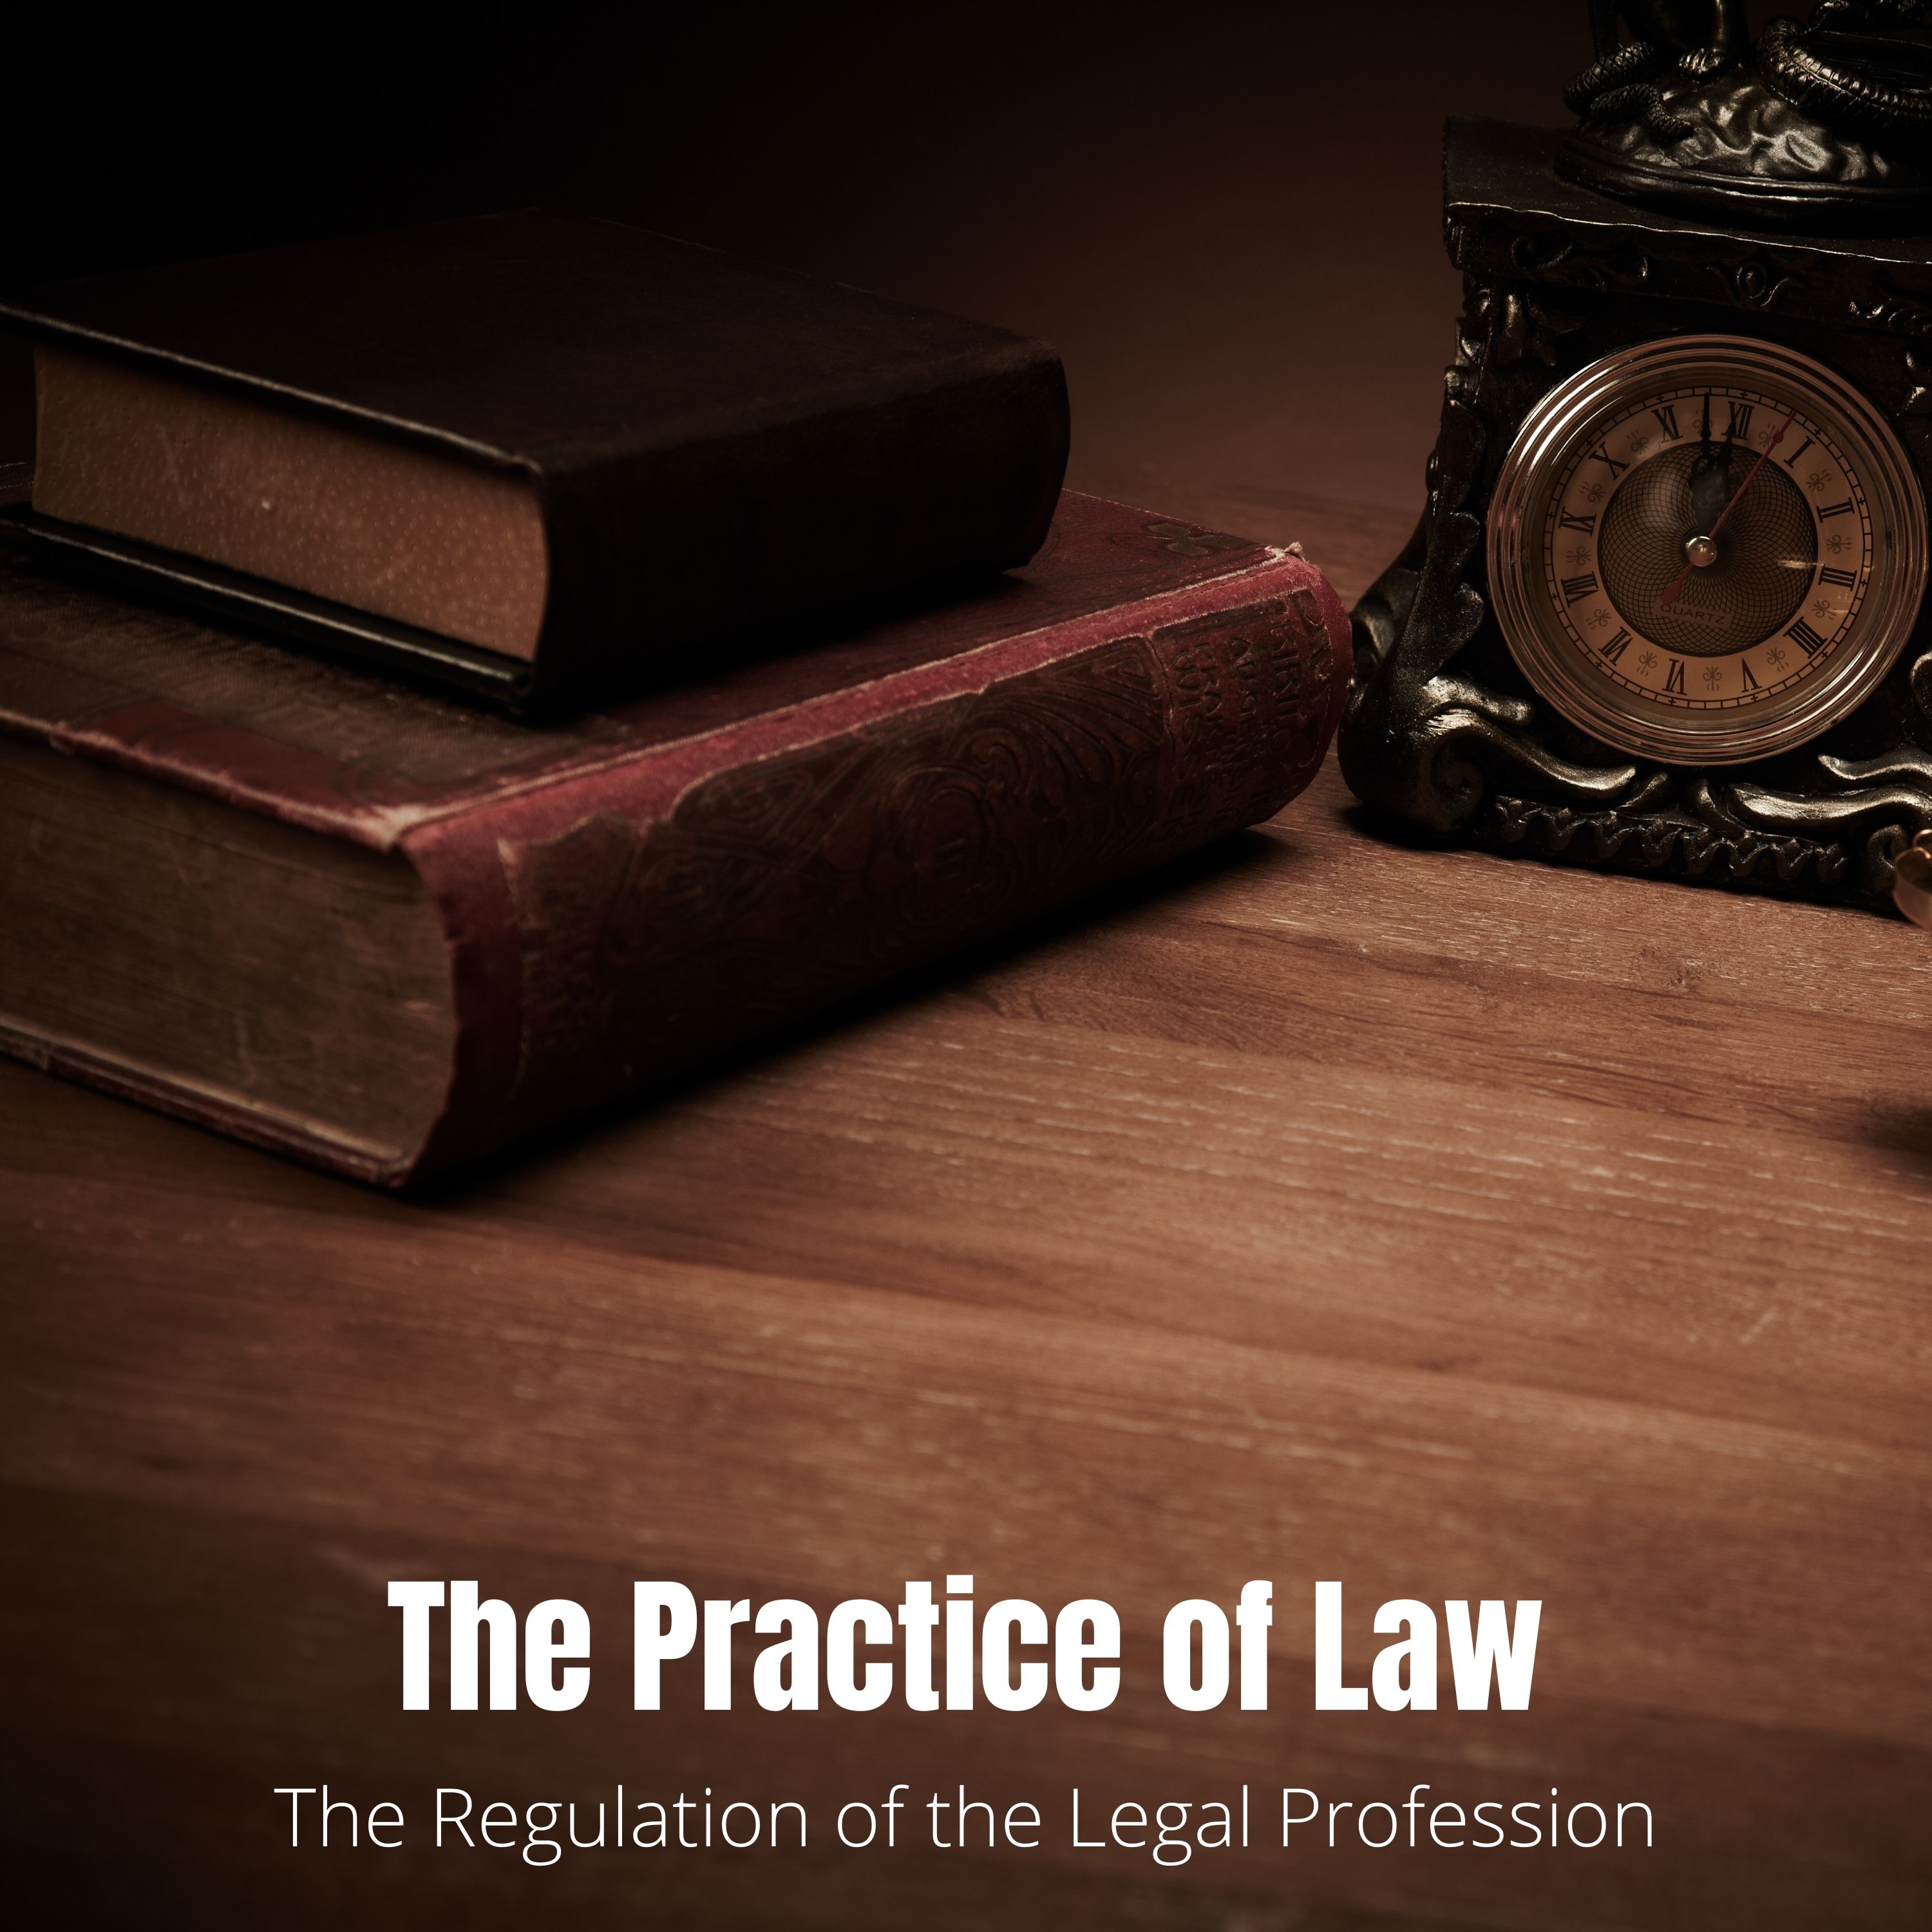 The Practice of Law - Lecture 7: The Regulation of the Legal Profession